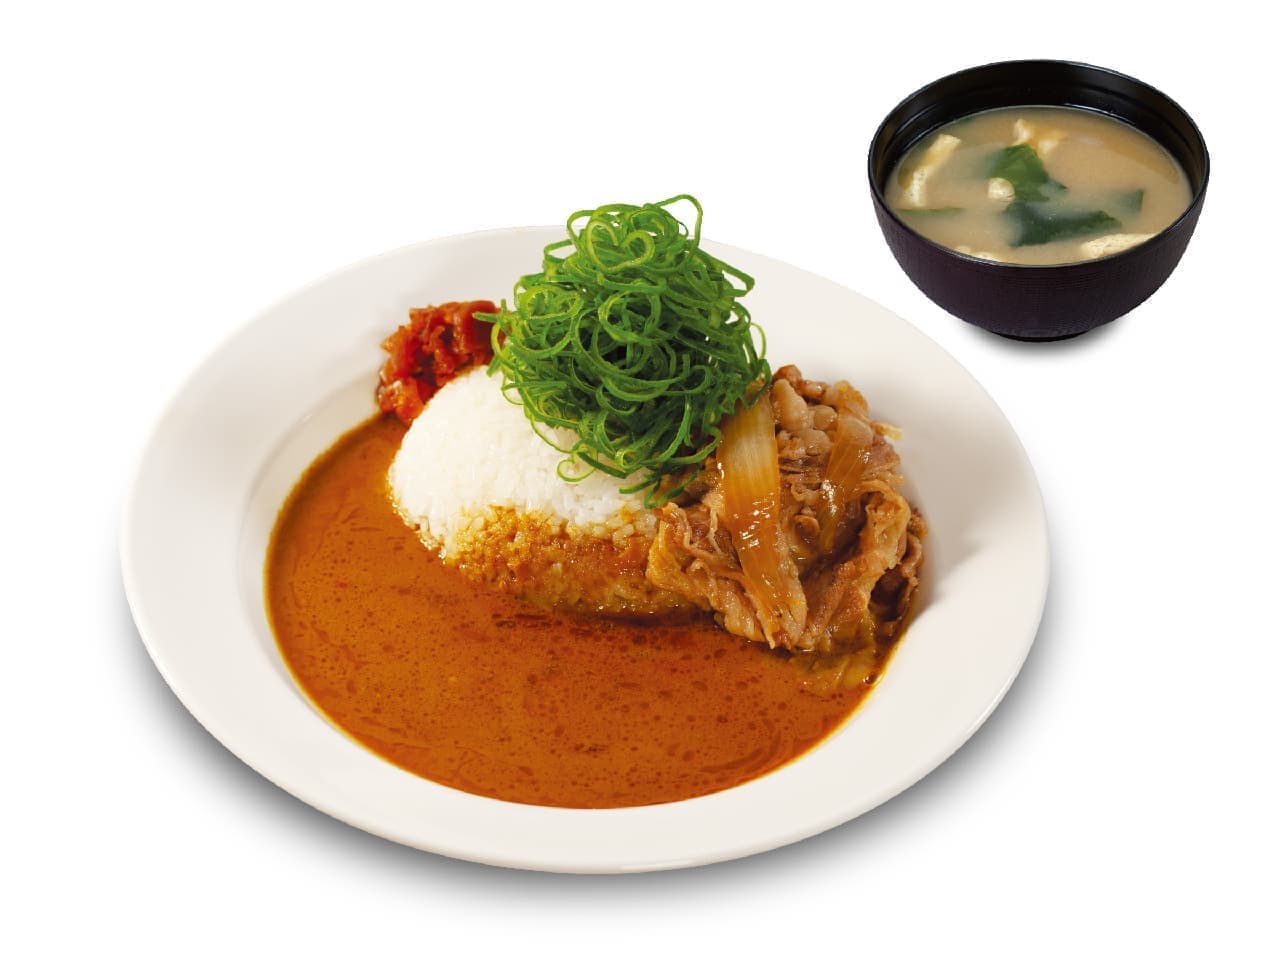 Matsuya "Spice Curry with plenty of green onions